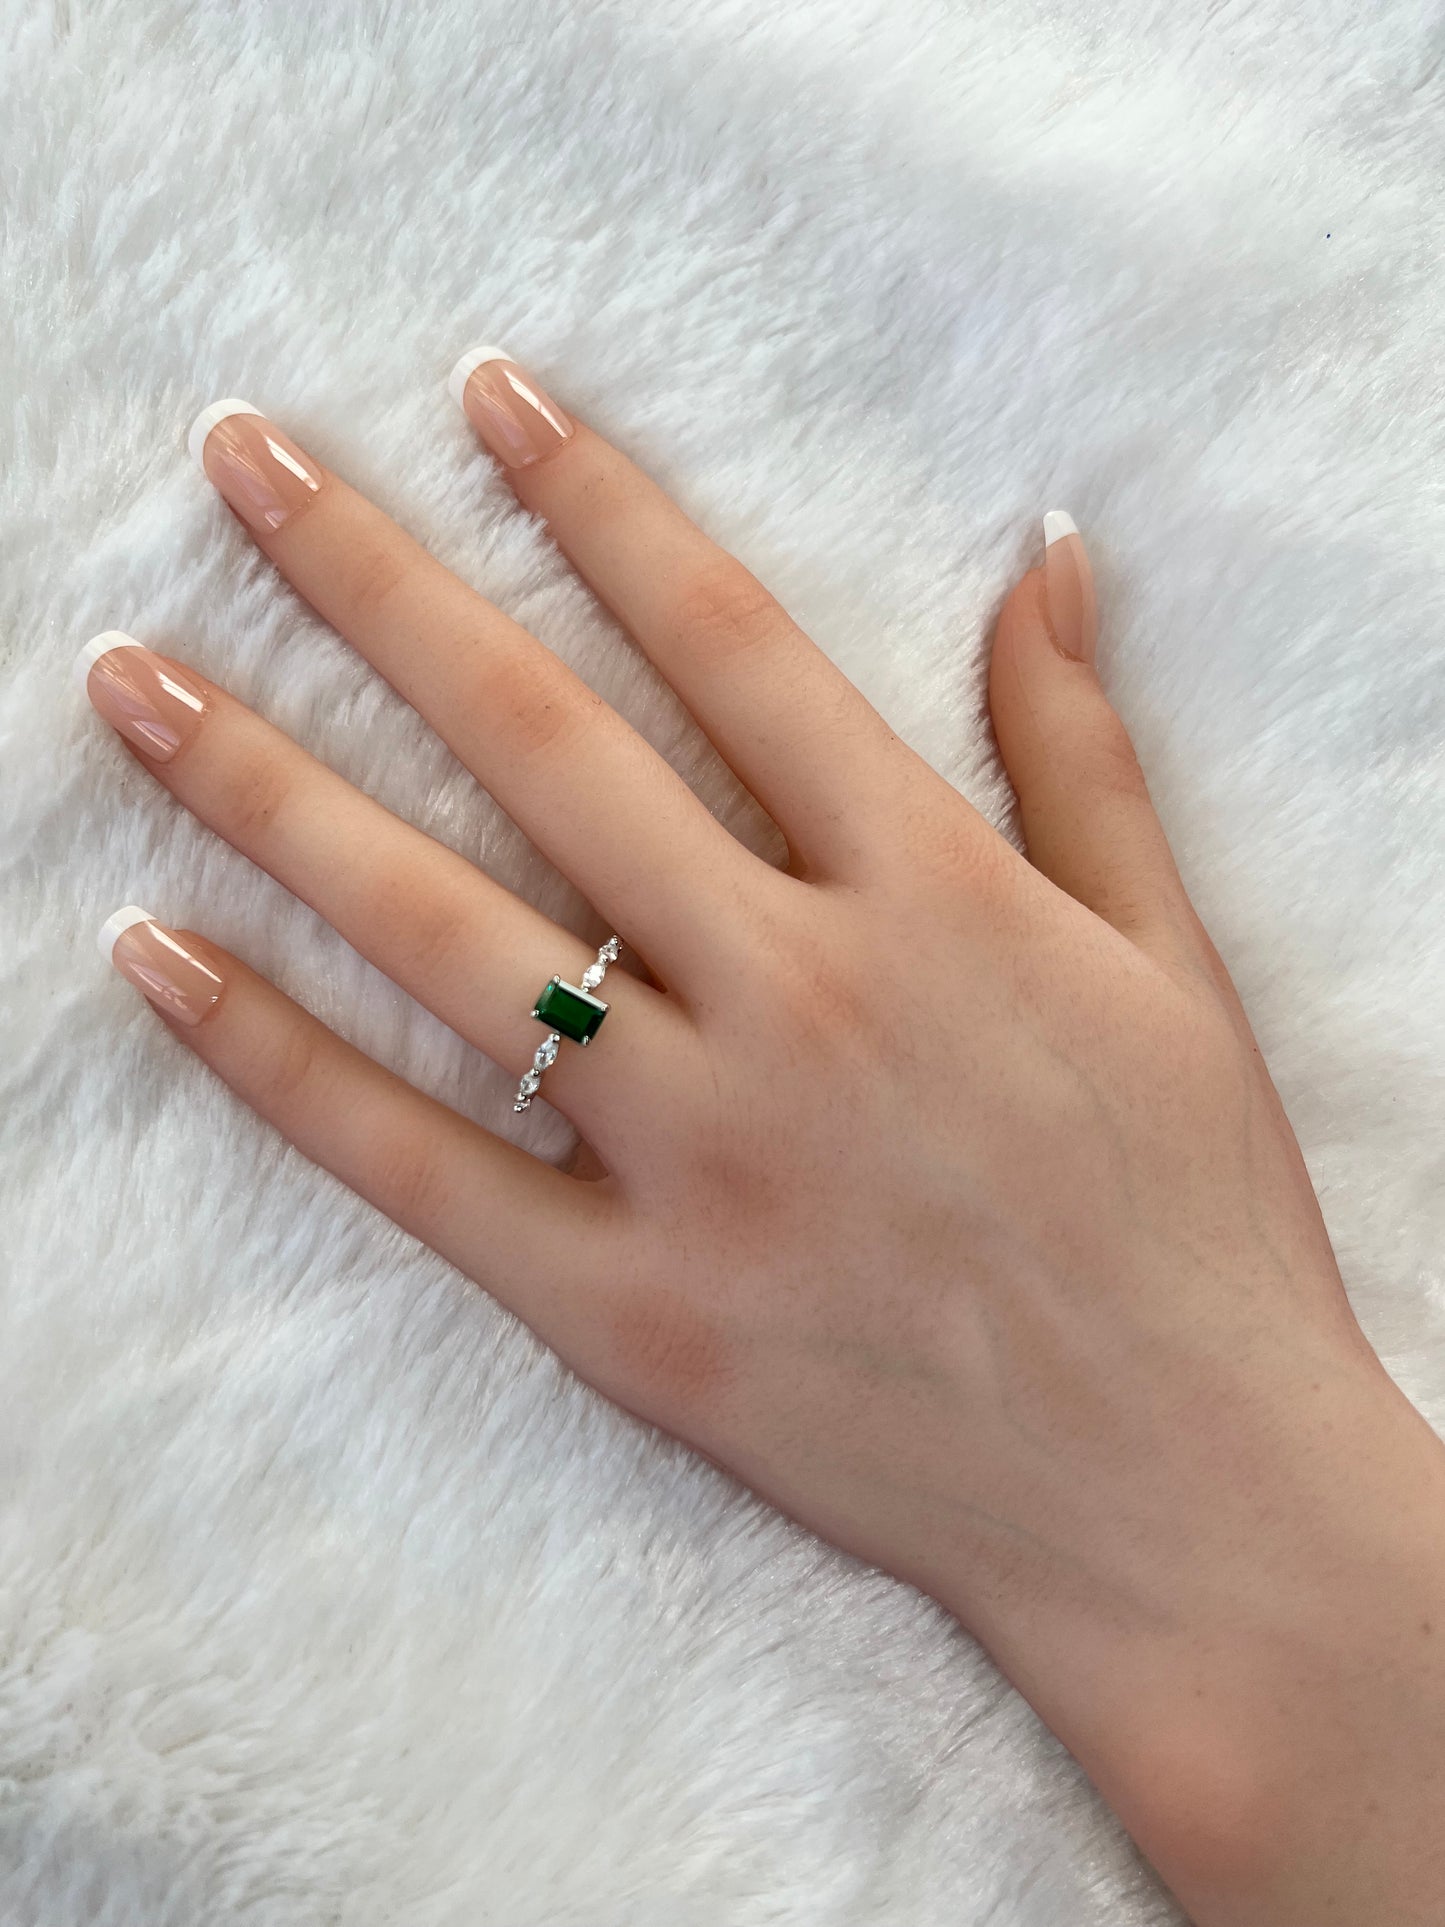 Dainty Sterling Silver Green & Clear Cubic Zirconia Baguette Engagement Ring